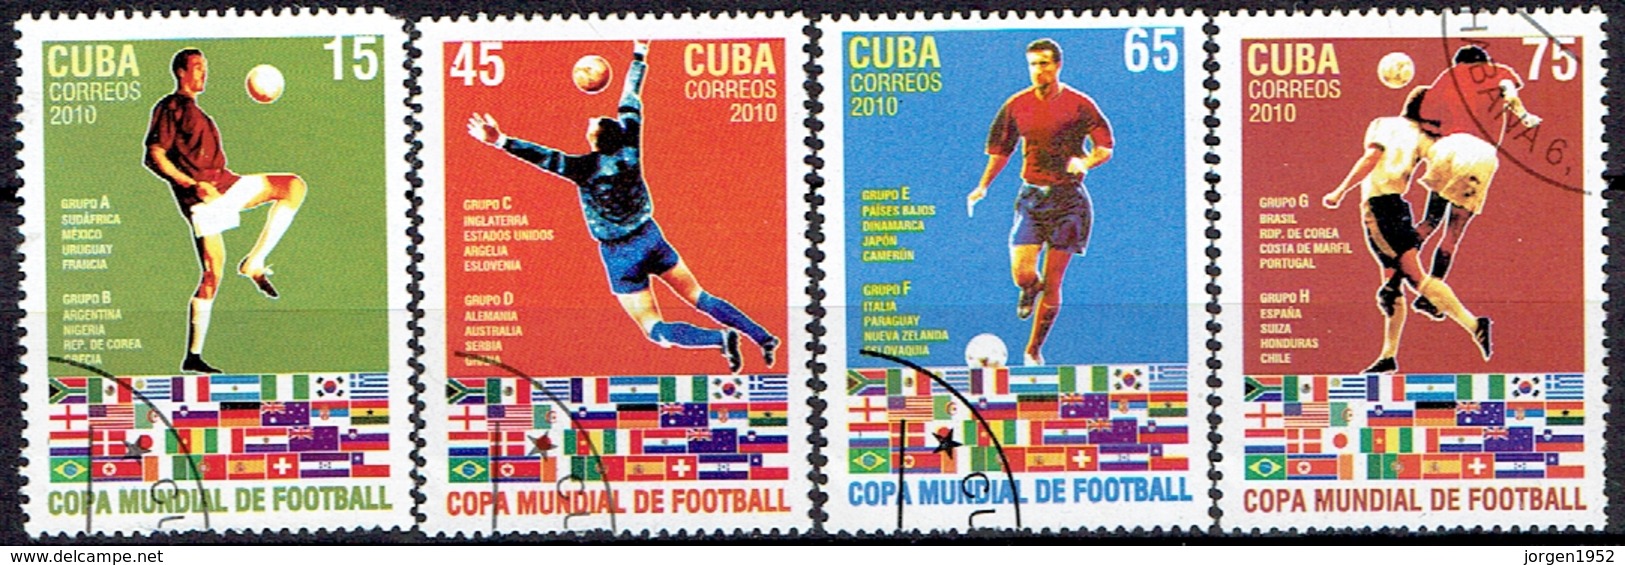 CUBA # FROM 2010 STAMPWORLD 5387-90 - Used Stamps